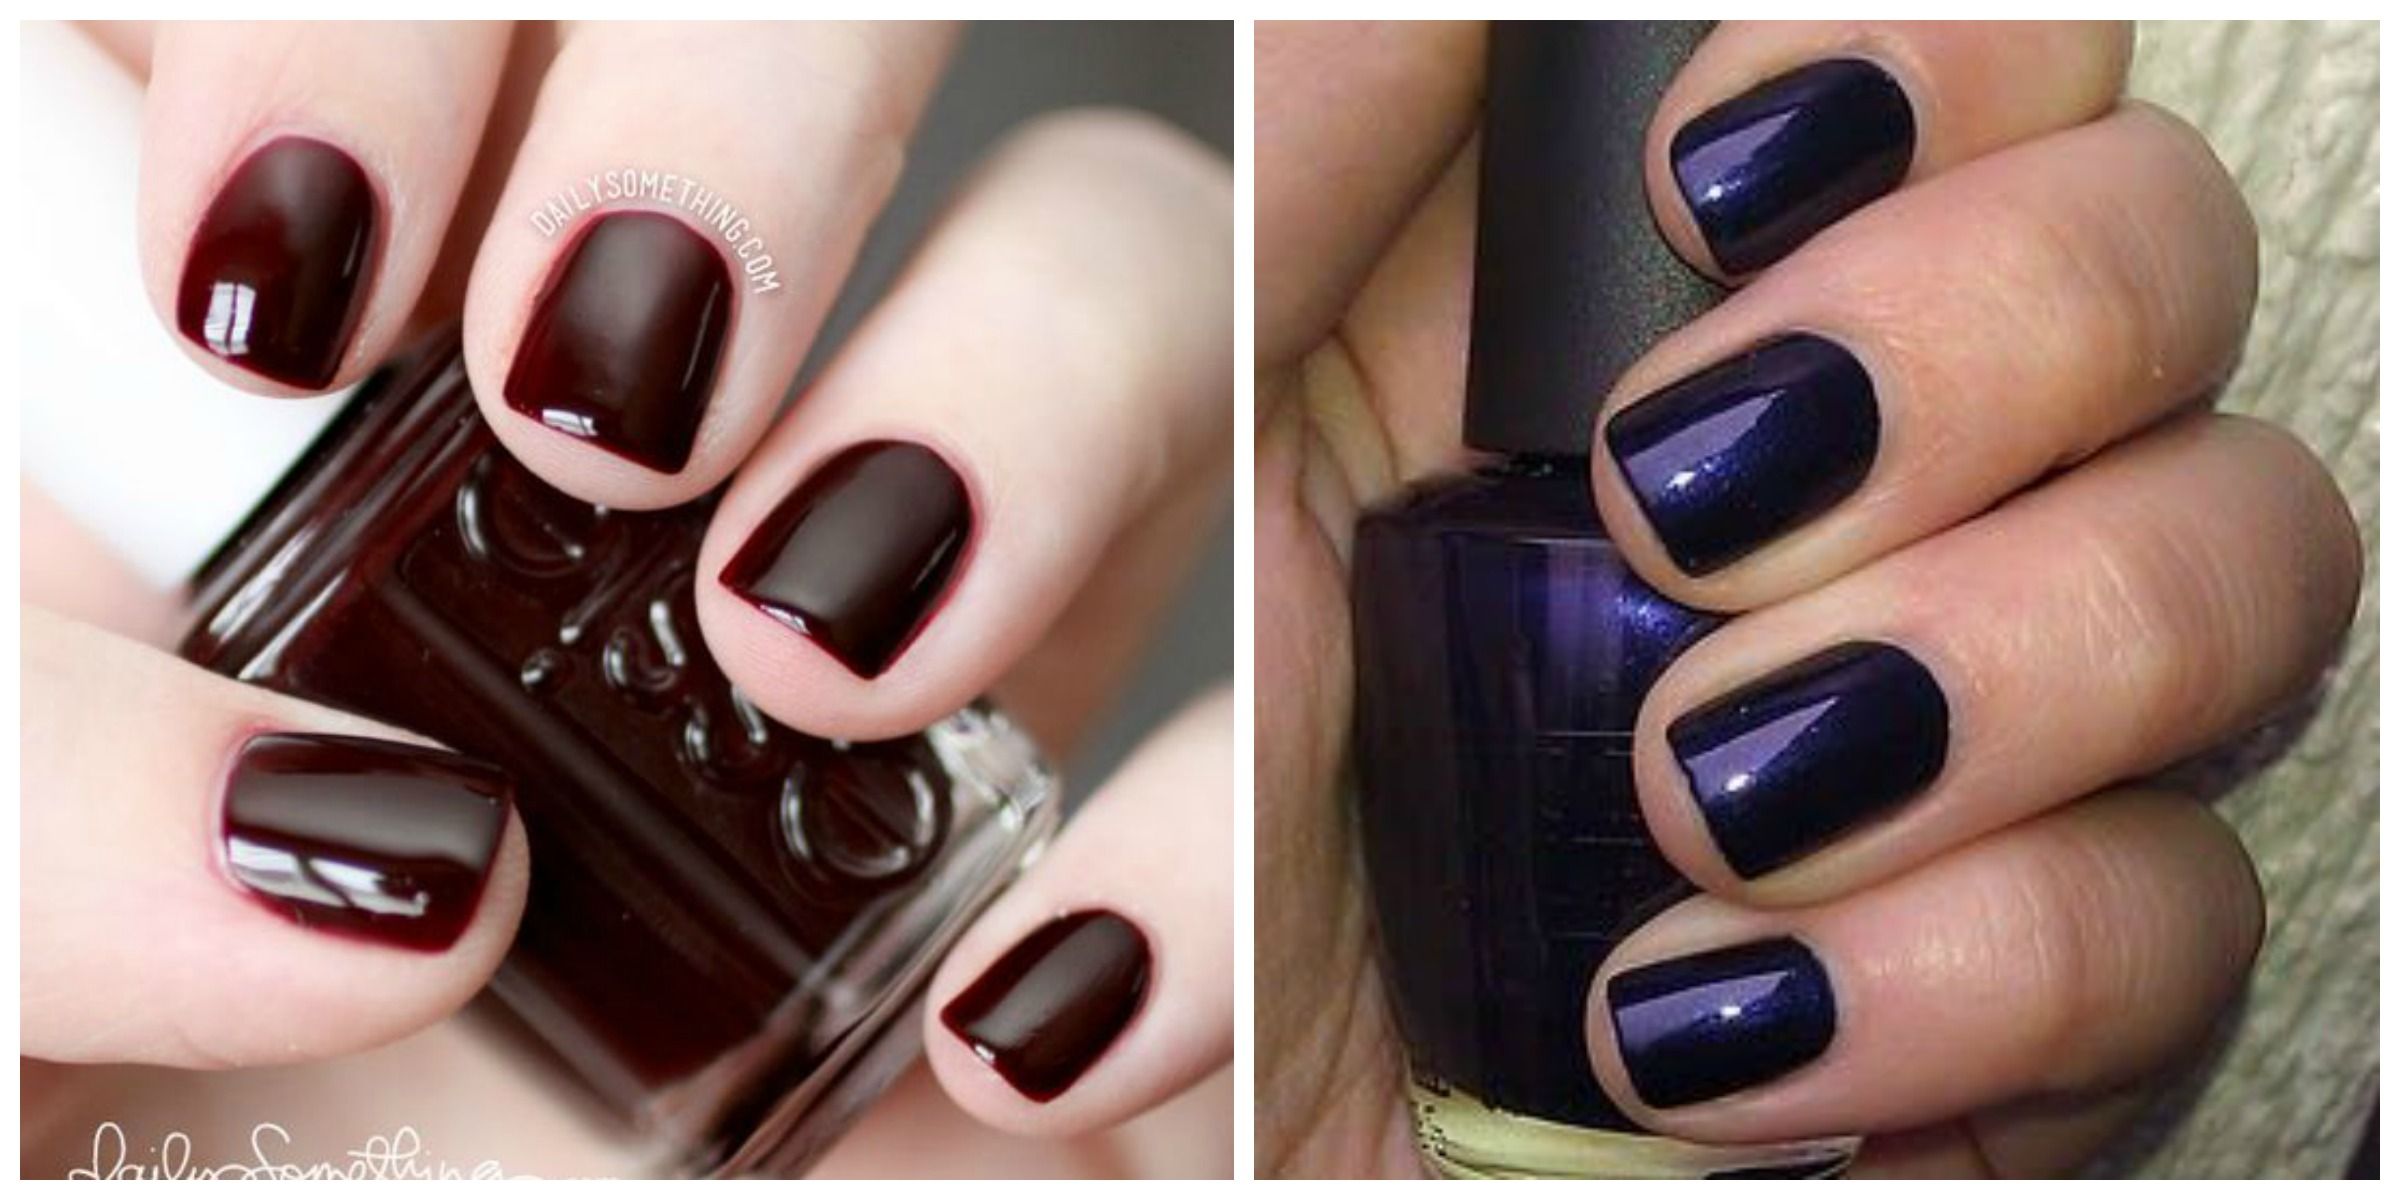 5. 10 Best Winter Nail Colors for 2021 - Top Winter Nail Polish Shades - wide 2